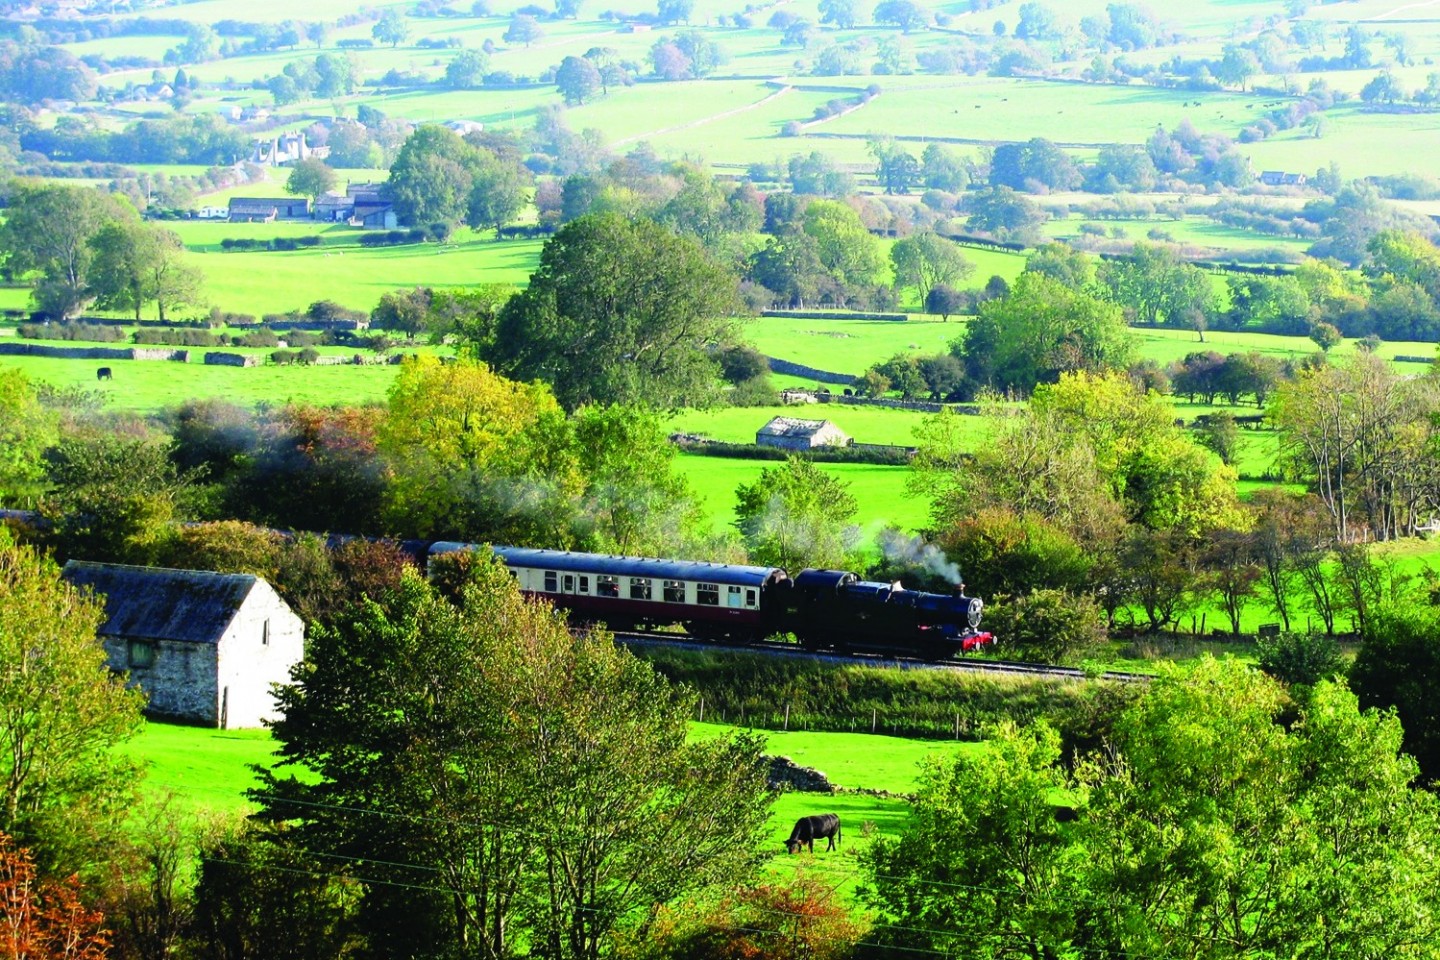 steam train trips yorkshire dales